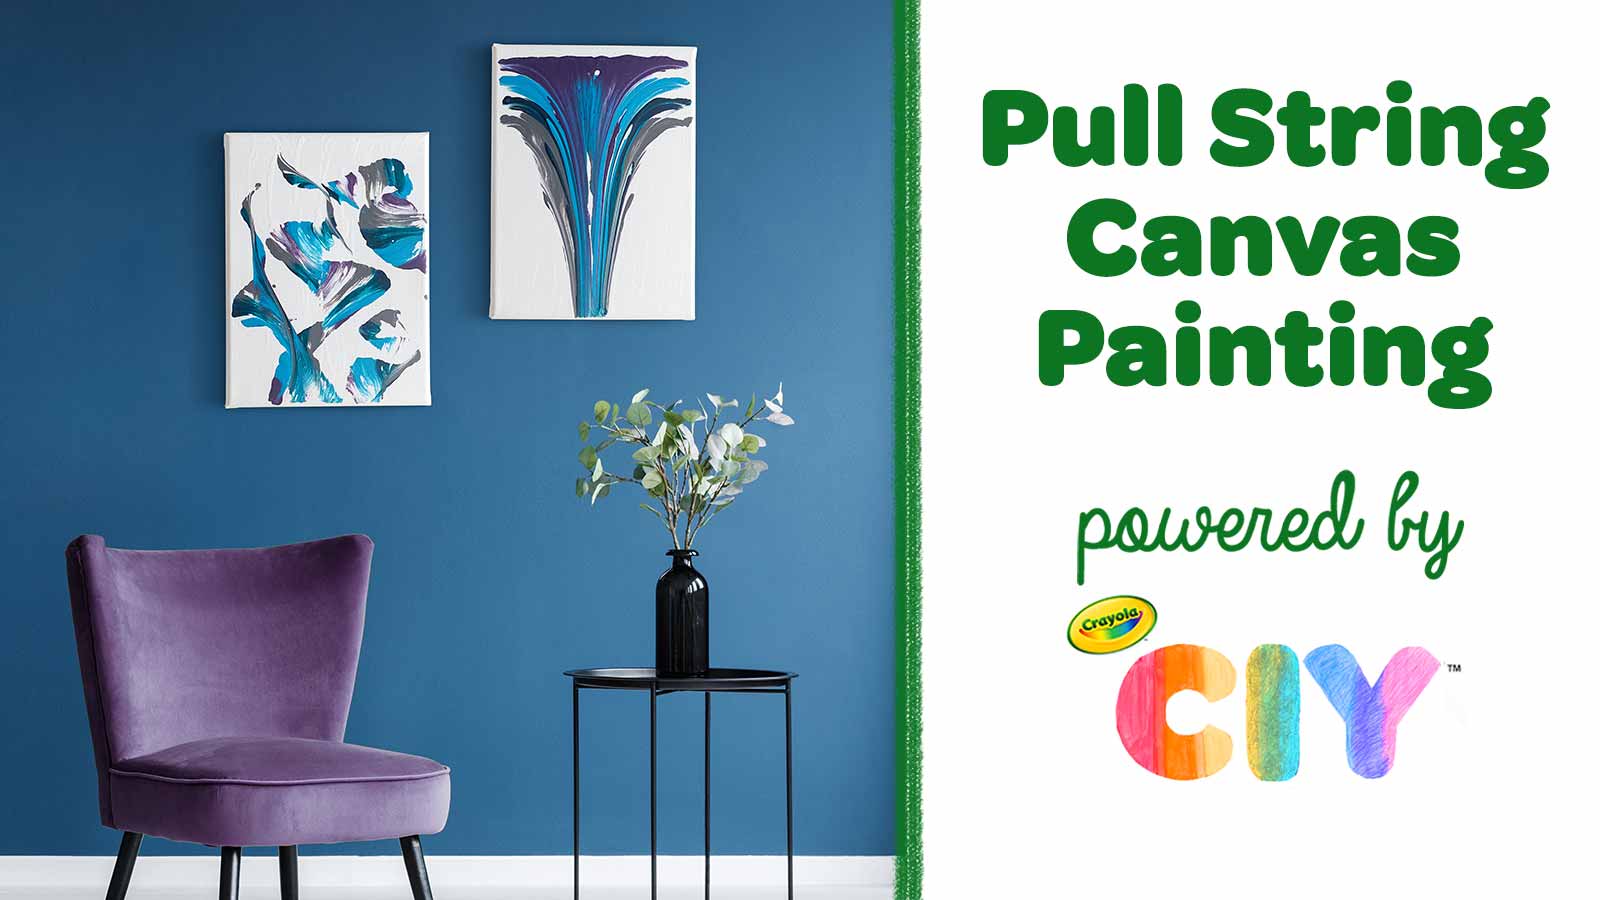 Pull String Canvas Painting DIY, Crafts